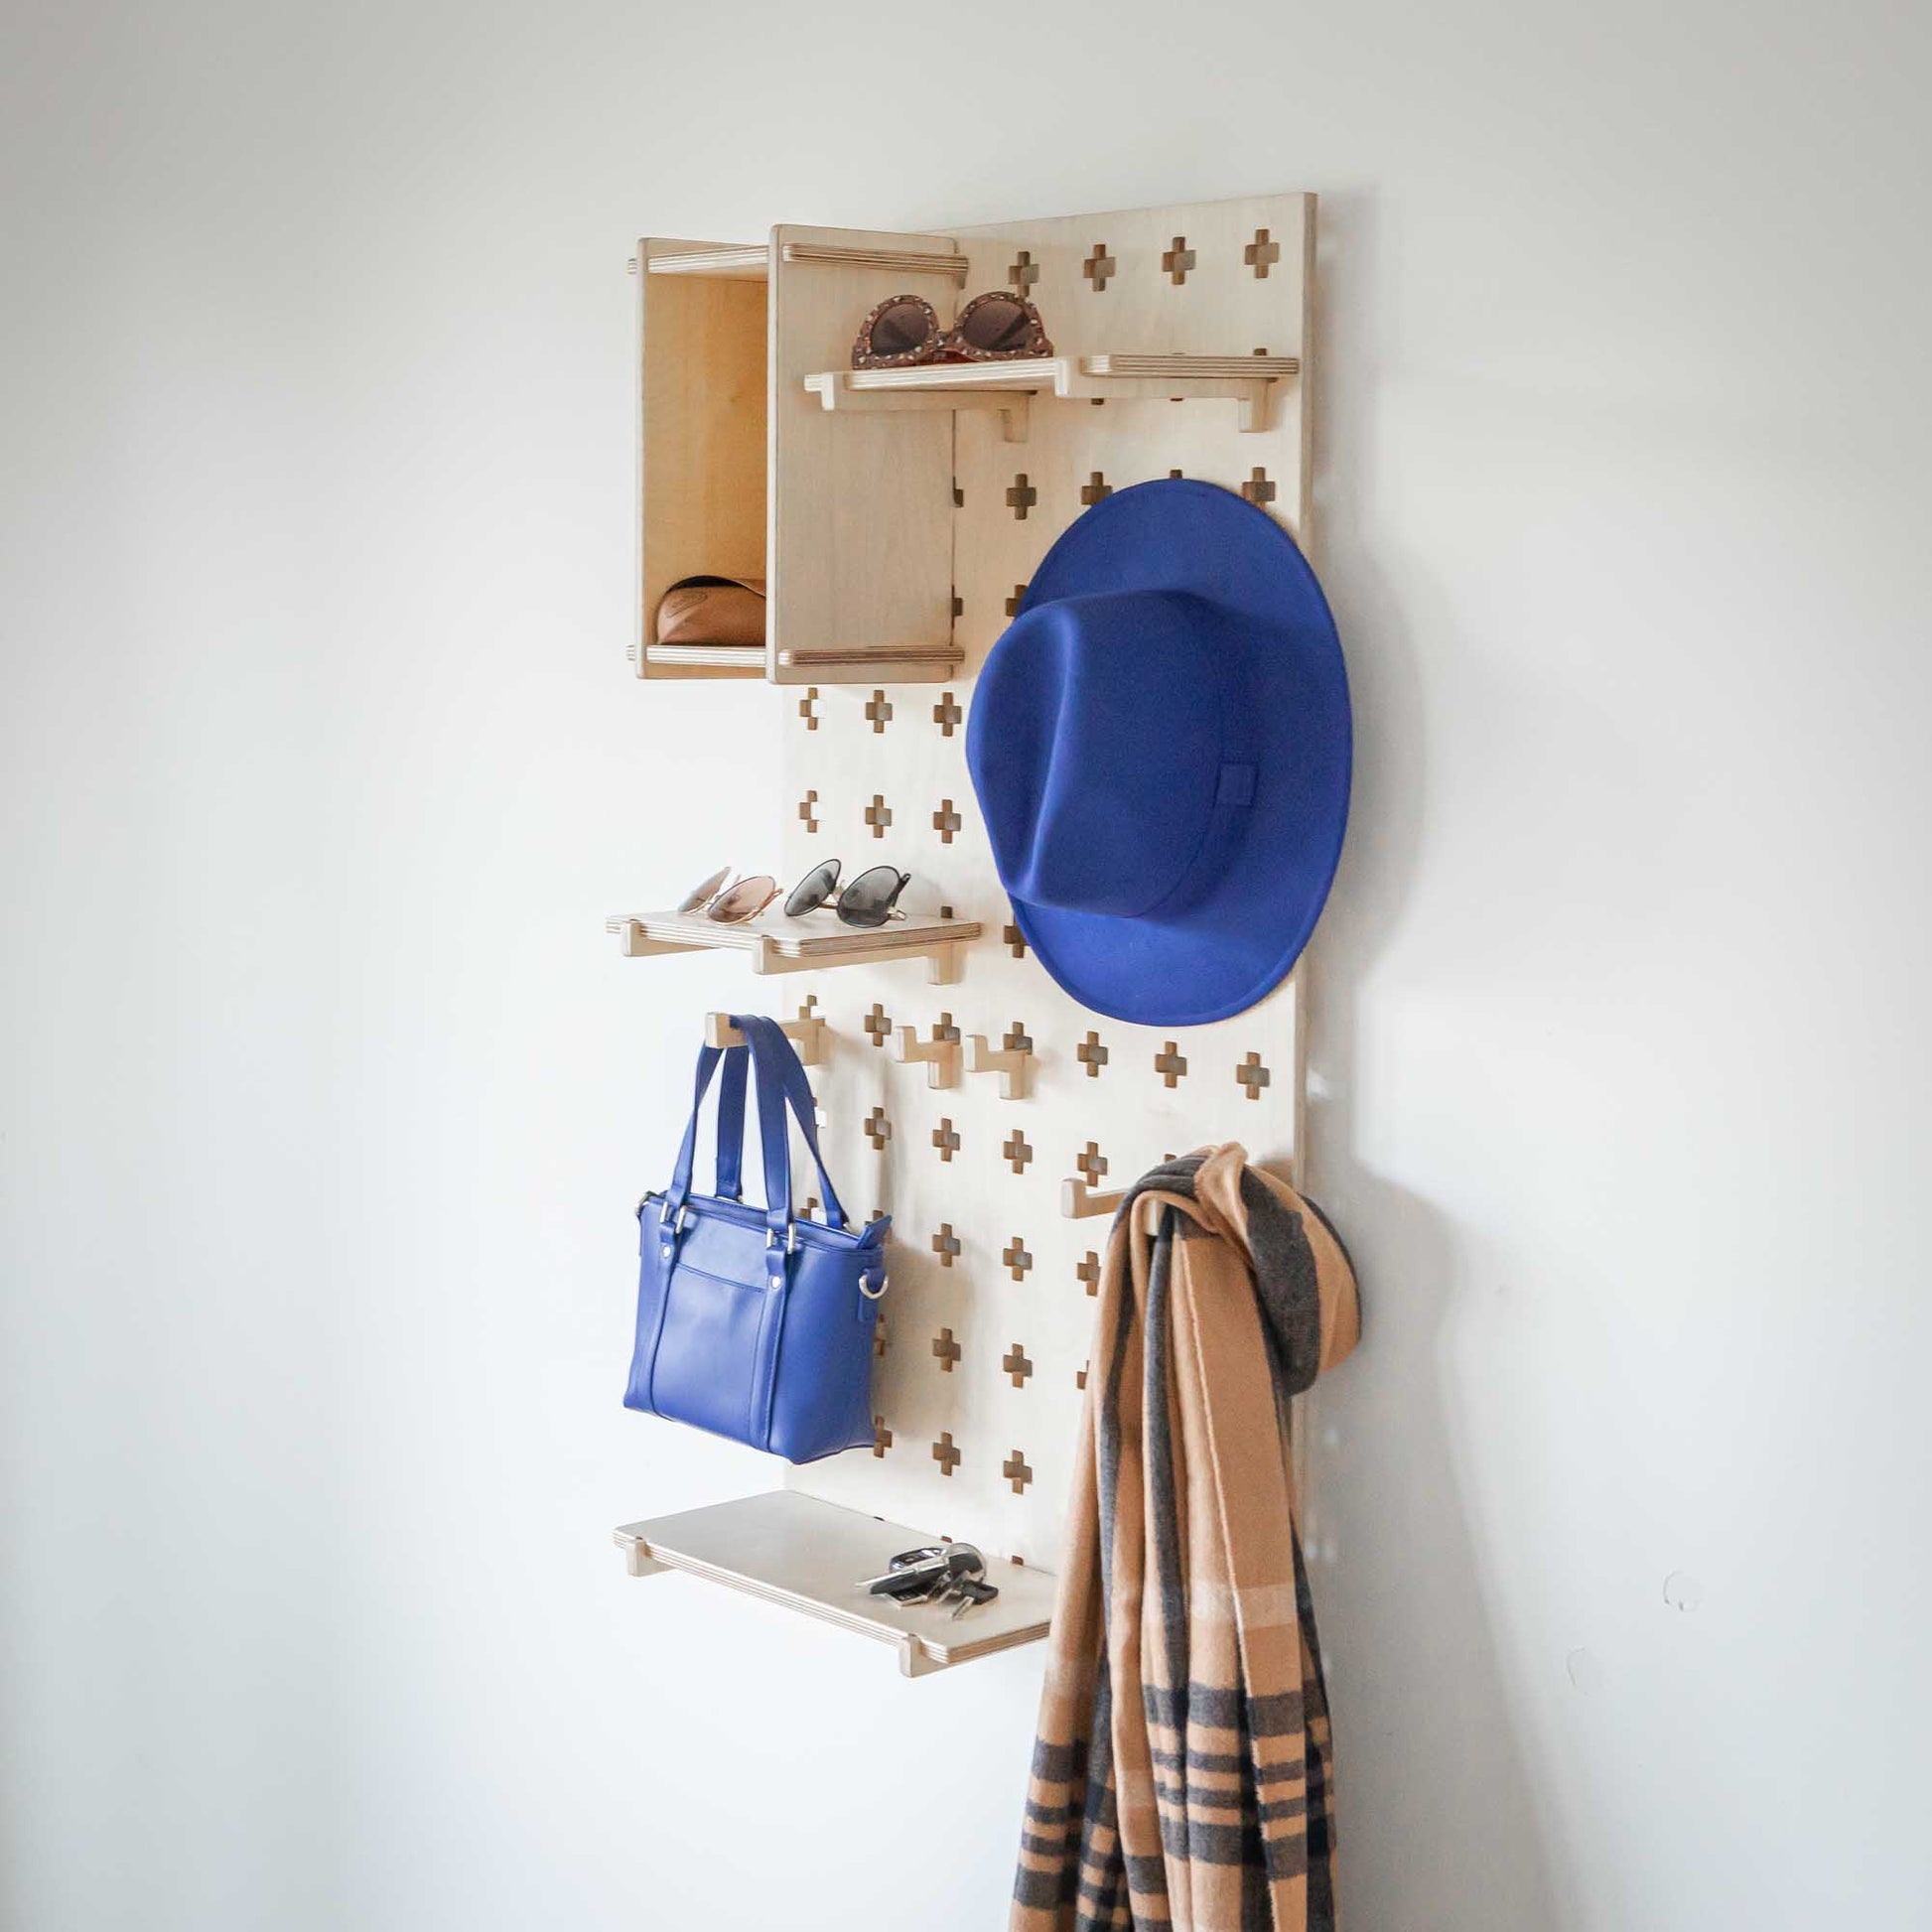 A "Sweet HOME from wood" Floating Shelves Pegboard with hats and bags hanging on it, providing open storage shelves for all your organizational needs.